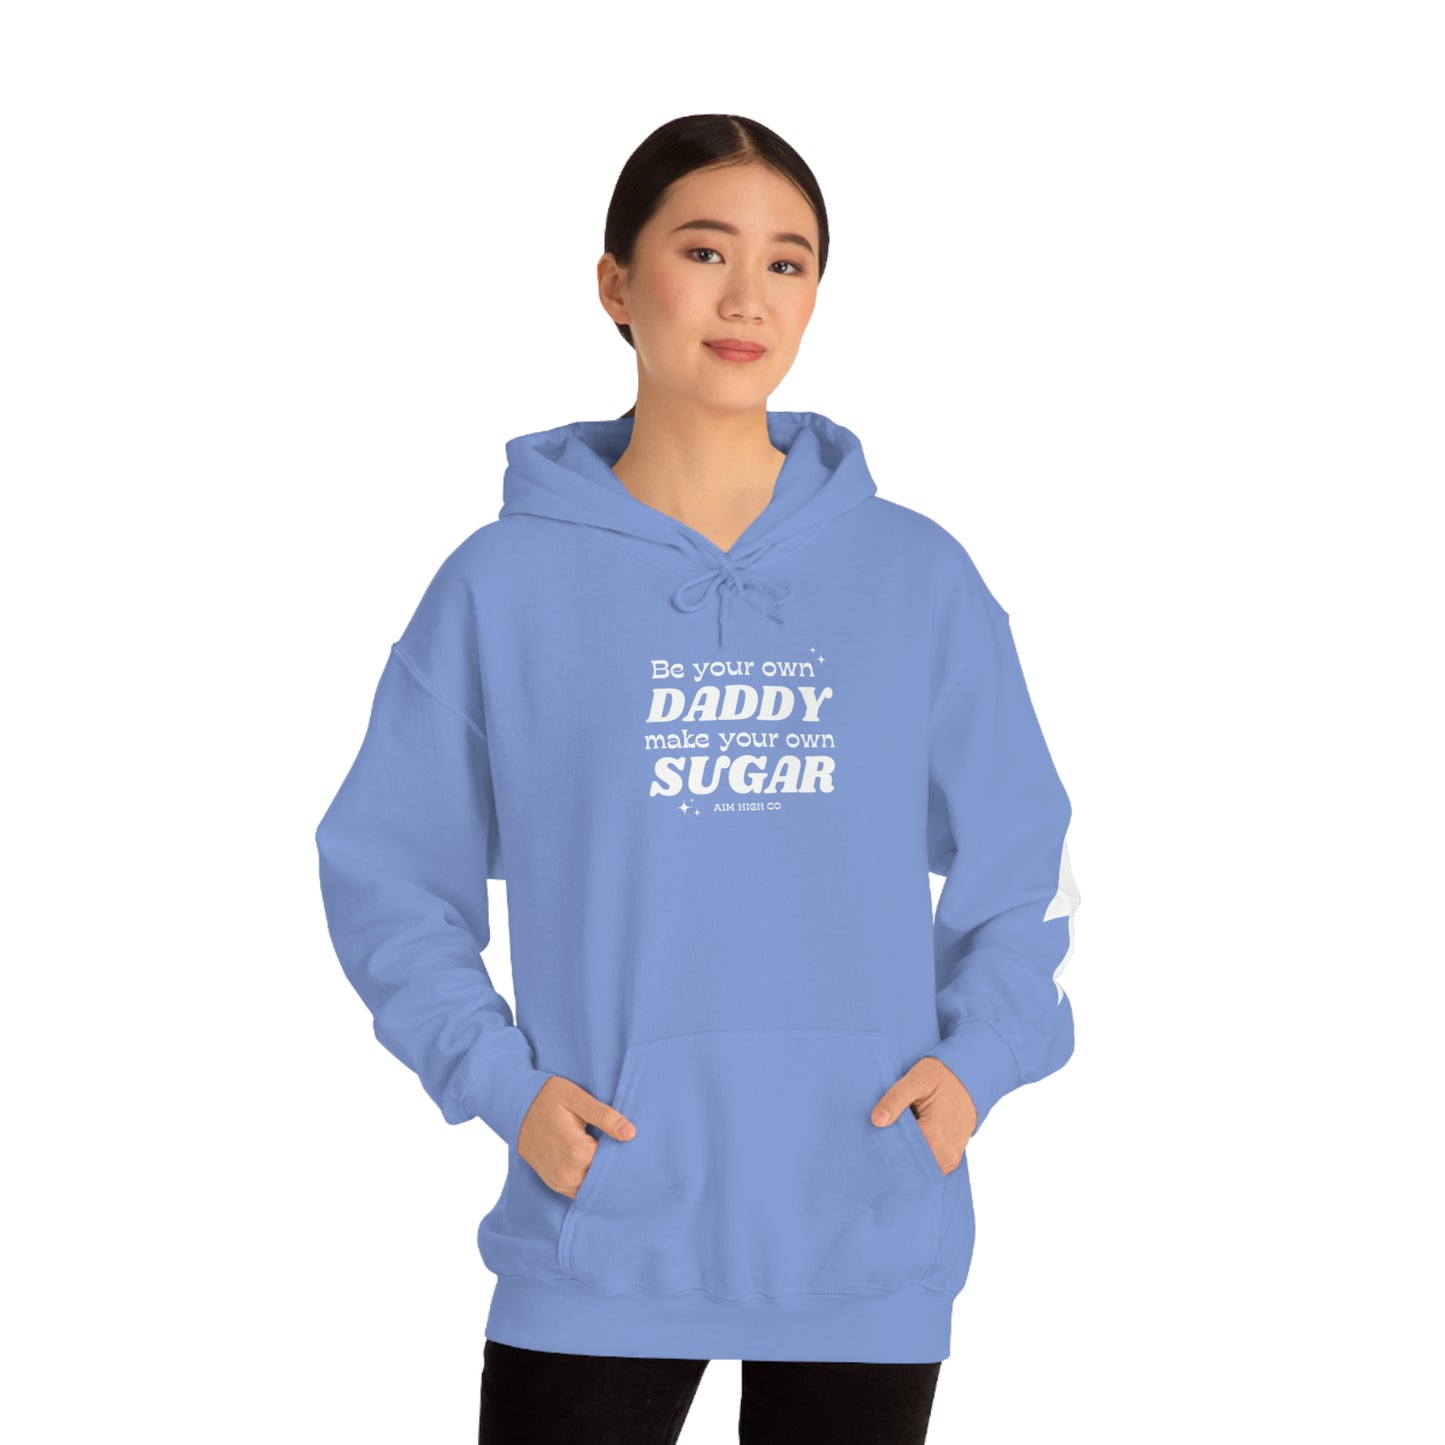 Be your Own Daddy Make your Own Sugar Hoodie